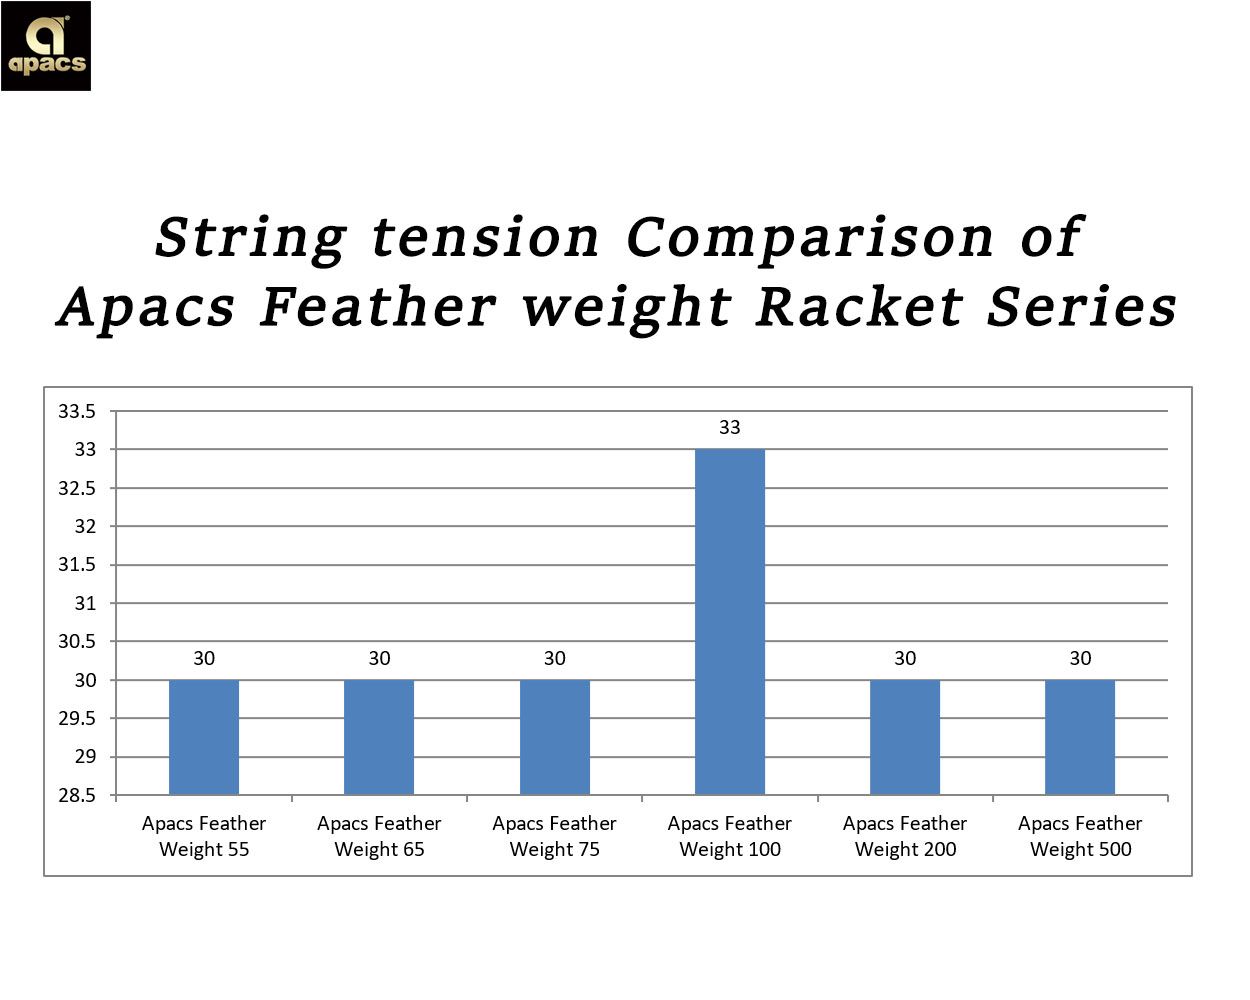 Apacs feather weight rackets series String tension comparison